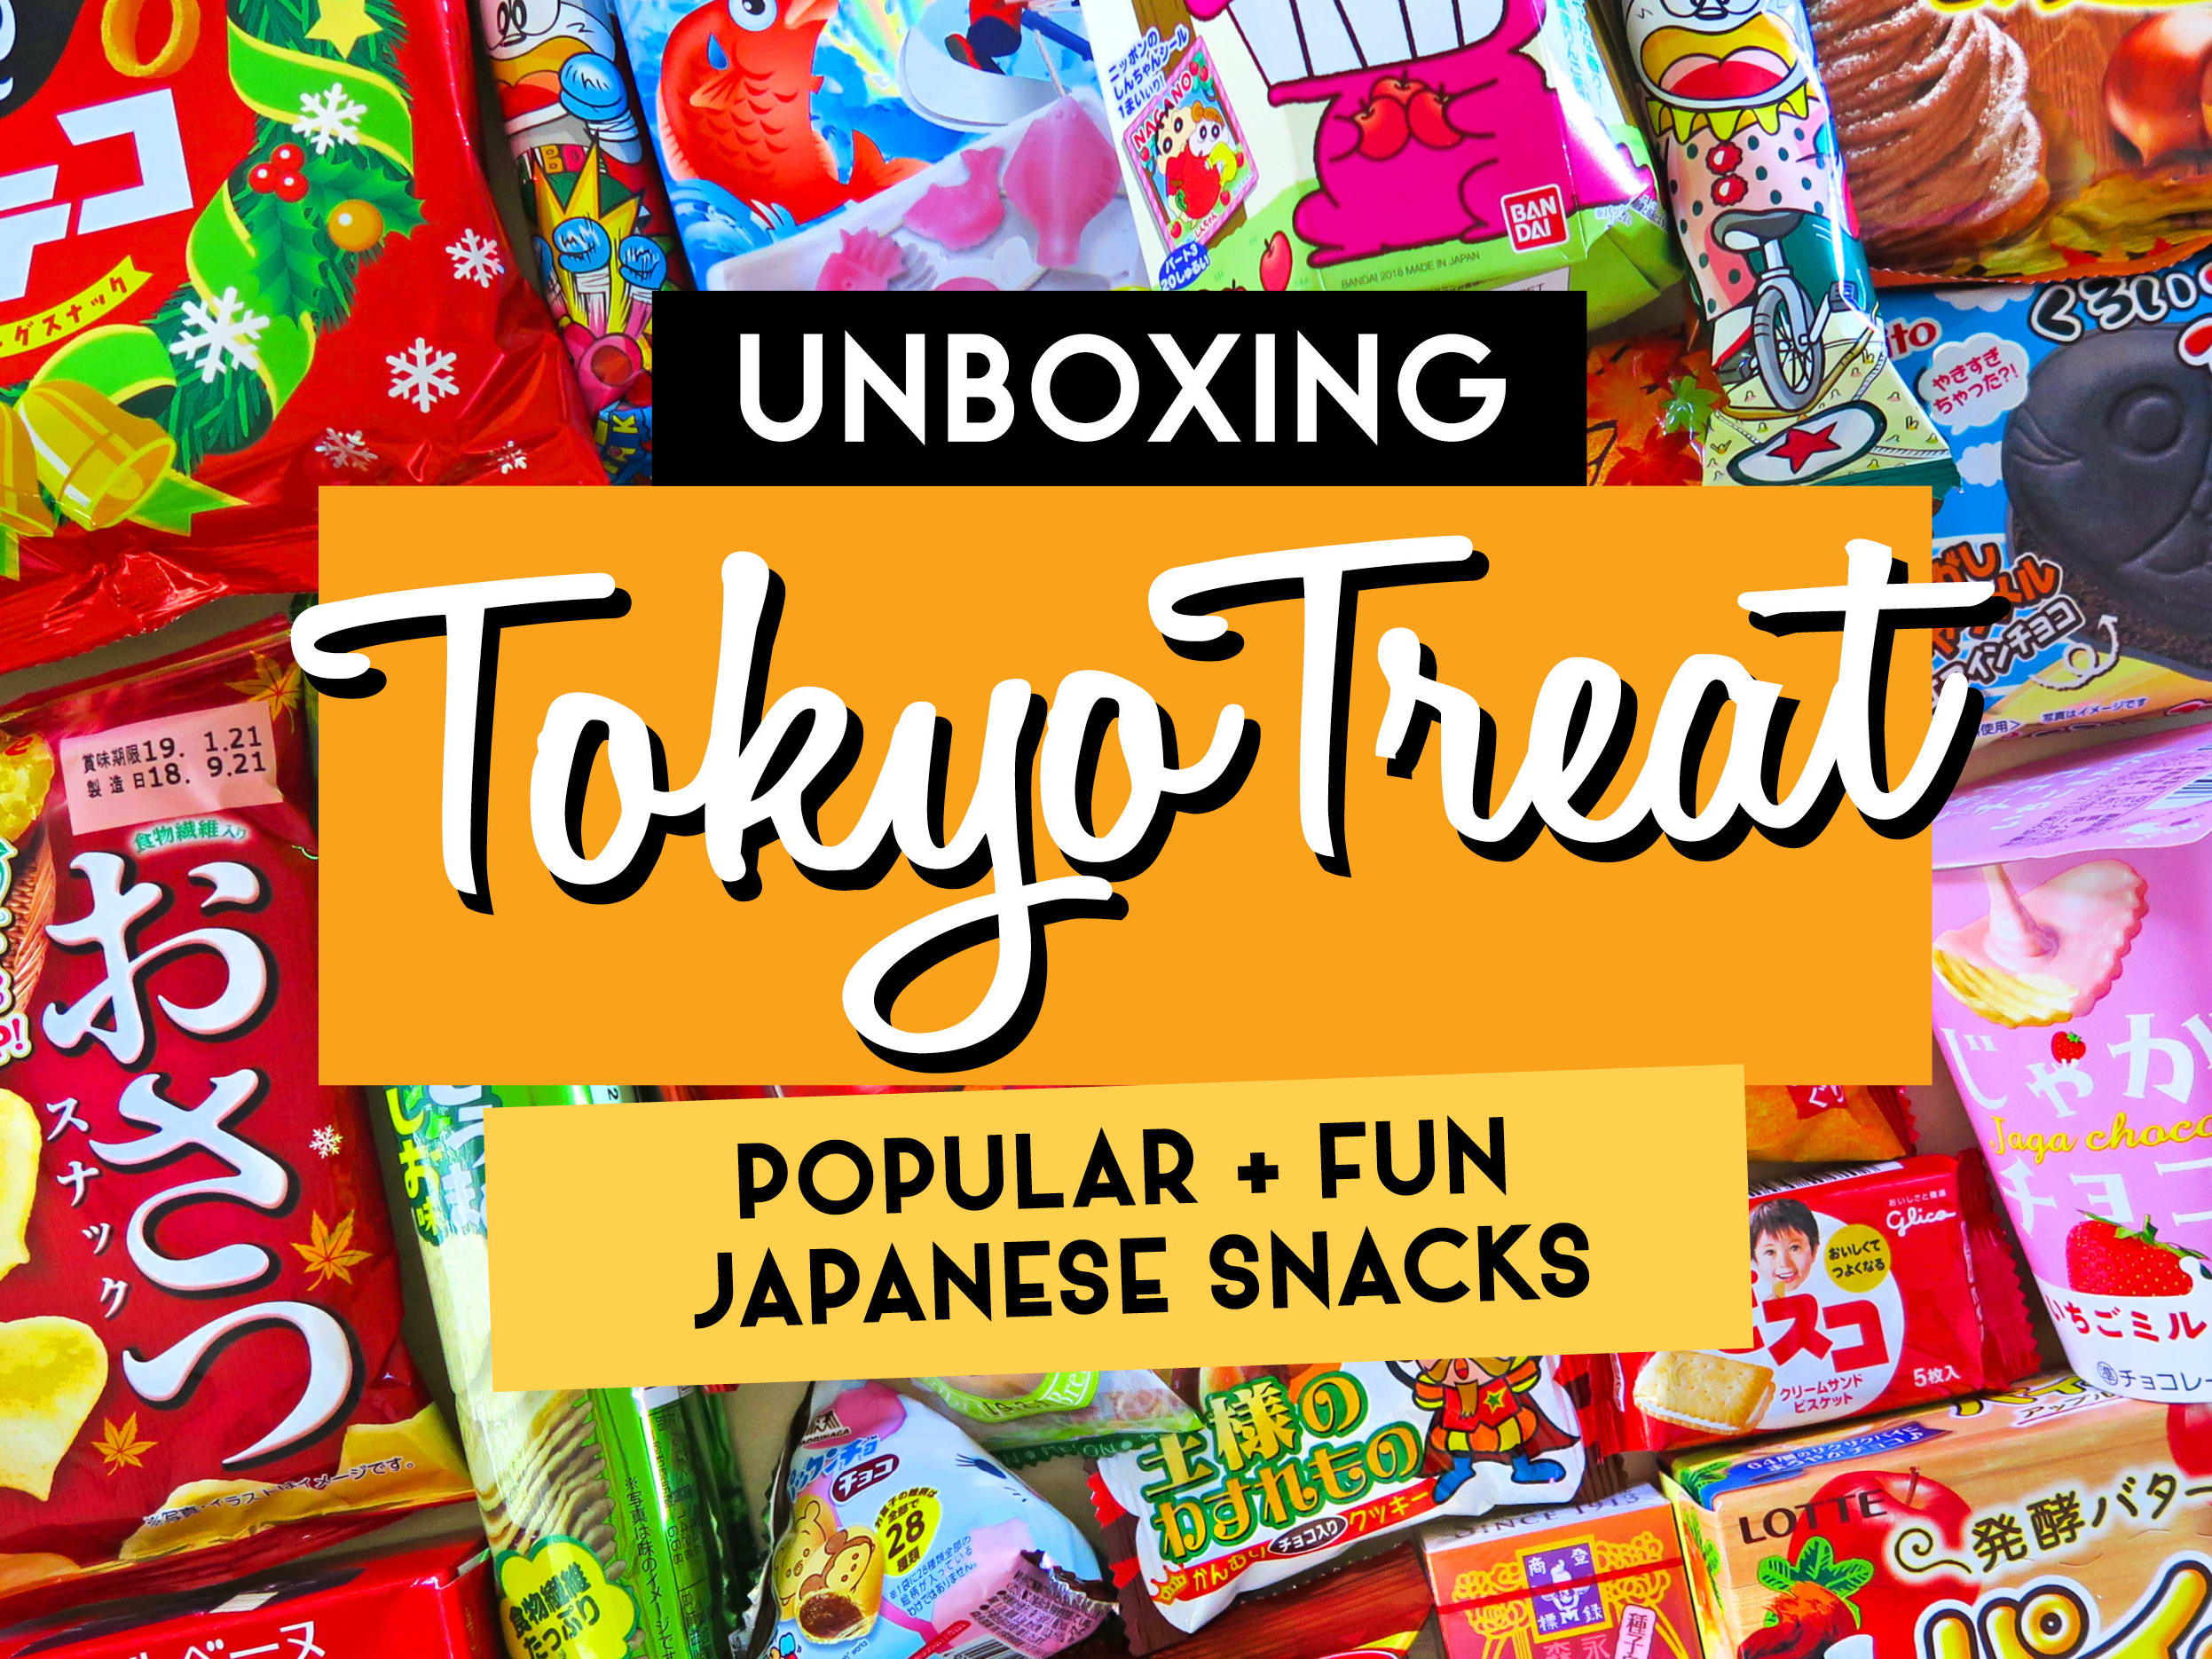 TokyoTreat Is Your One-Way Ticket to Japan